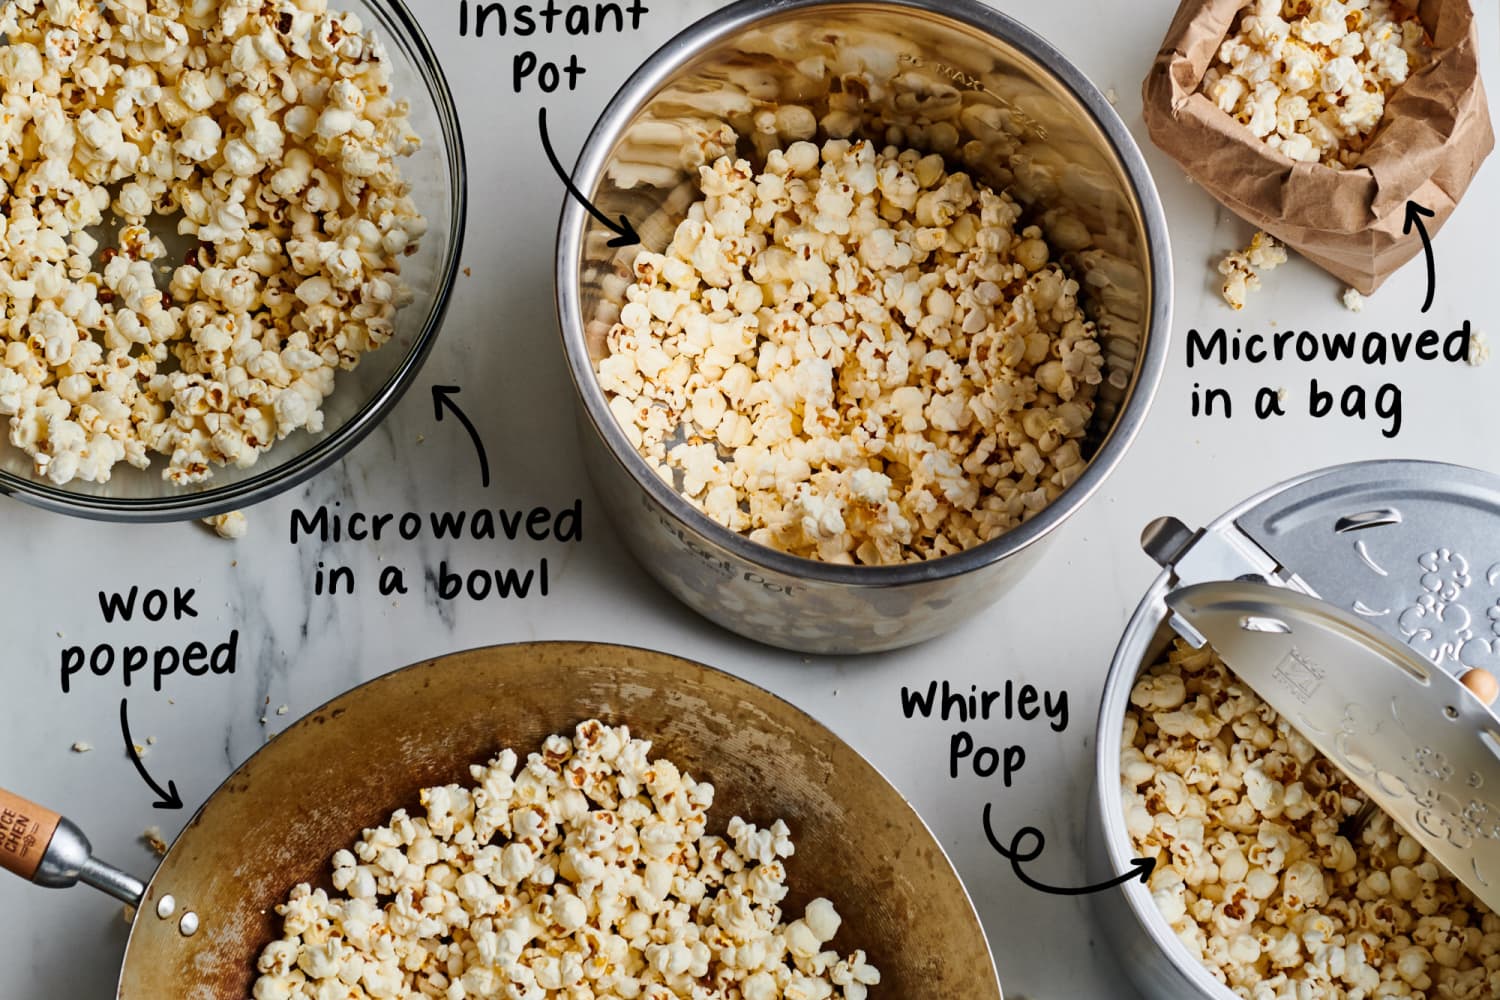 Tried 8 Methods for Popping Popcorn Home Found The Very Best | Kitchn